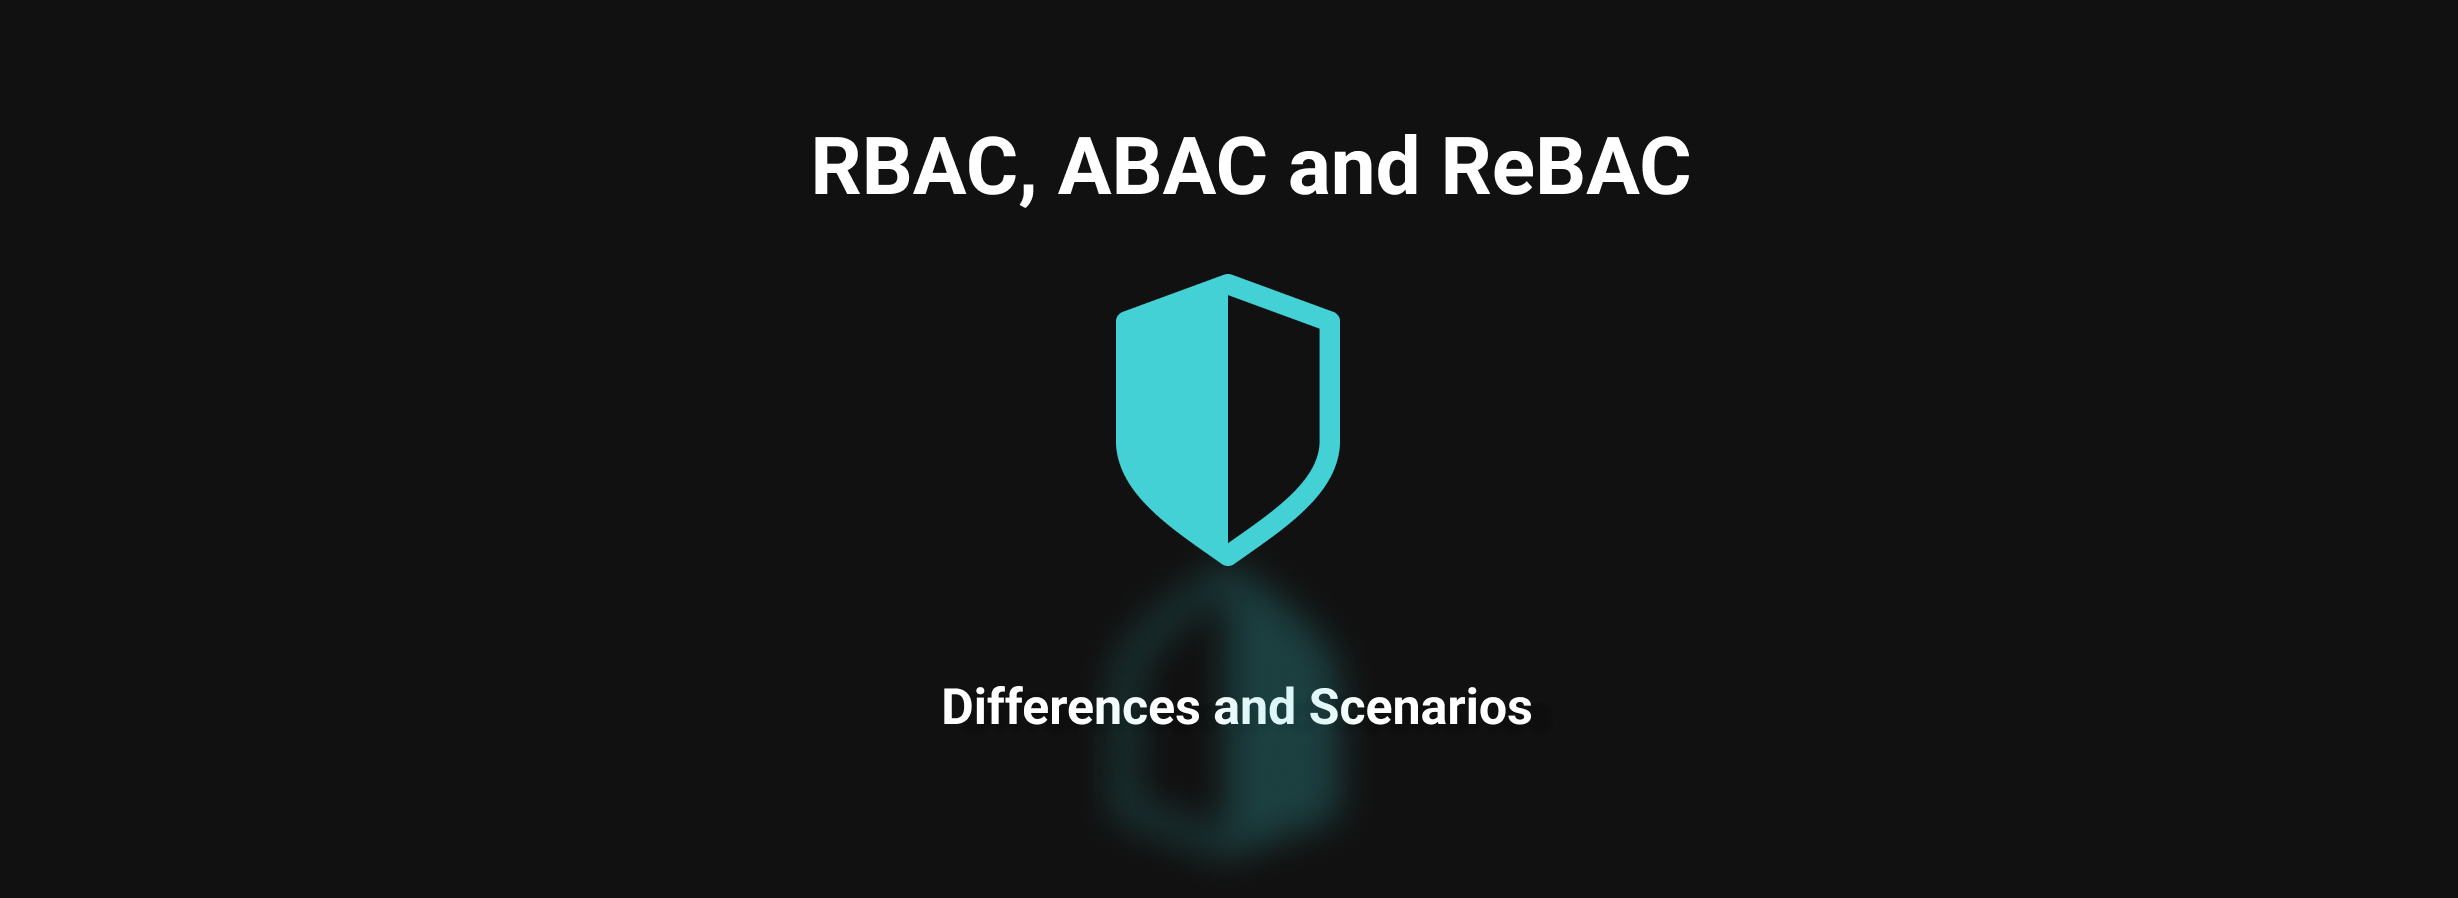 RBAC, ABAC, and ReBAC - Differences and Scenarios